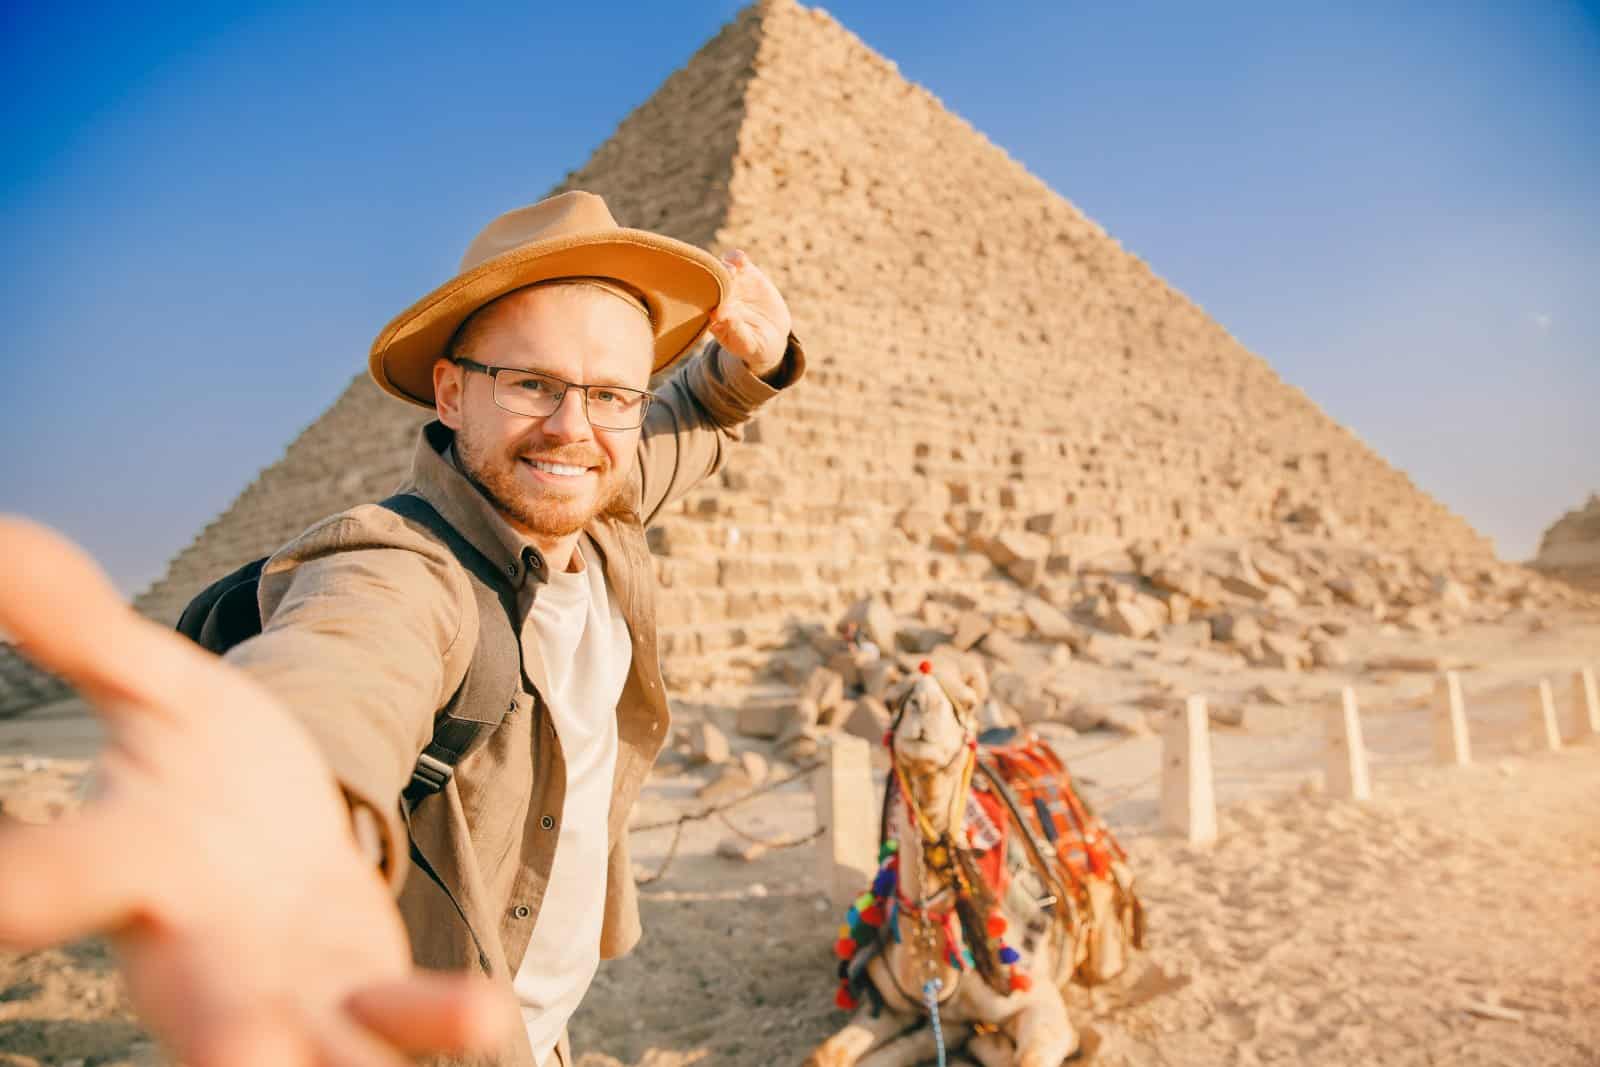 <p class="wp-caption-text">Image Credit: Shutterstock / Parilov</p>  <p>Explore ancient civilizations through digs and research in various countries. Requires advanced degrees and a passion for history. Fieldwork is often in remote locations, demanding physical stamina.</p>